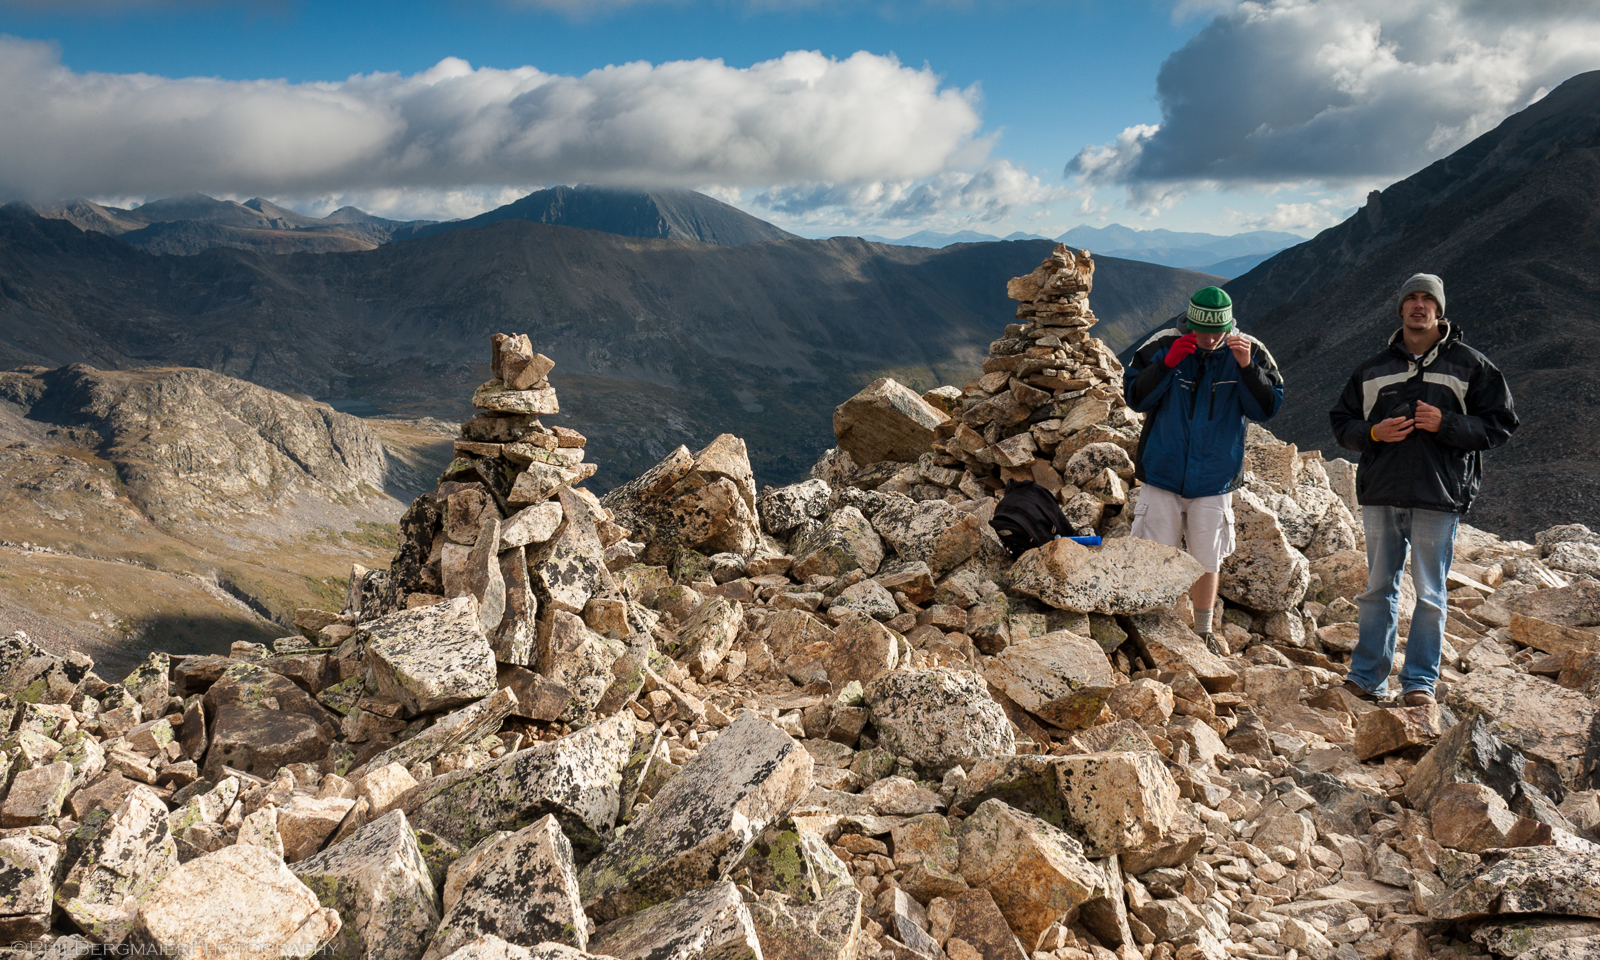 Photo 9 - Taking a break next to some large cairns